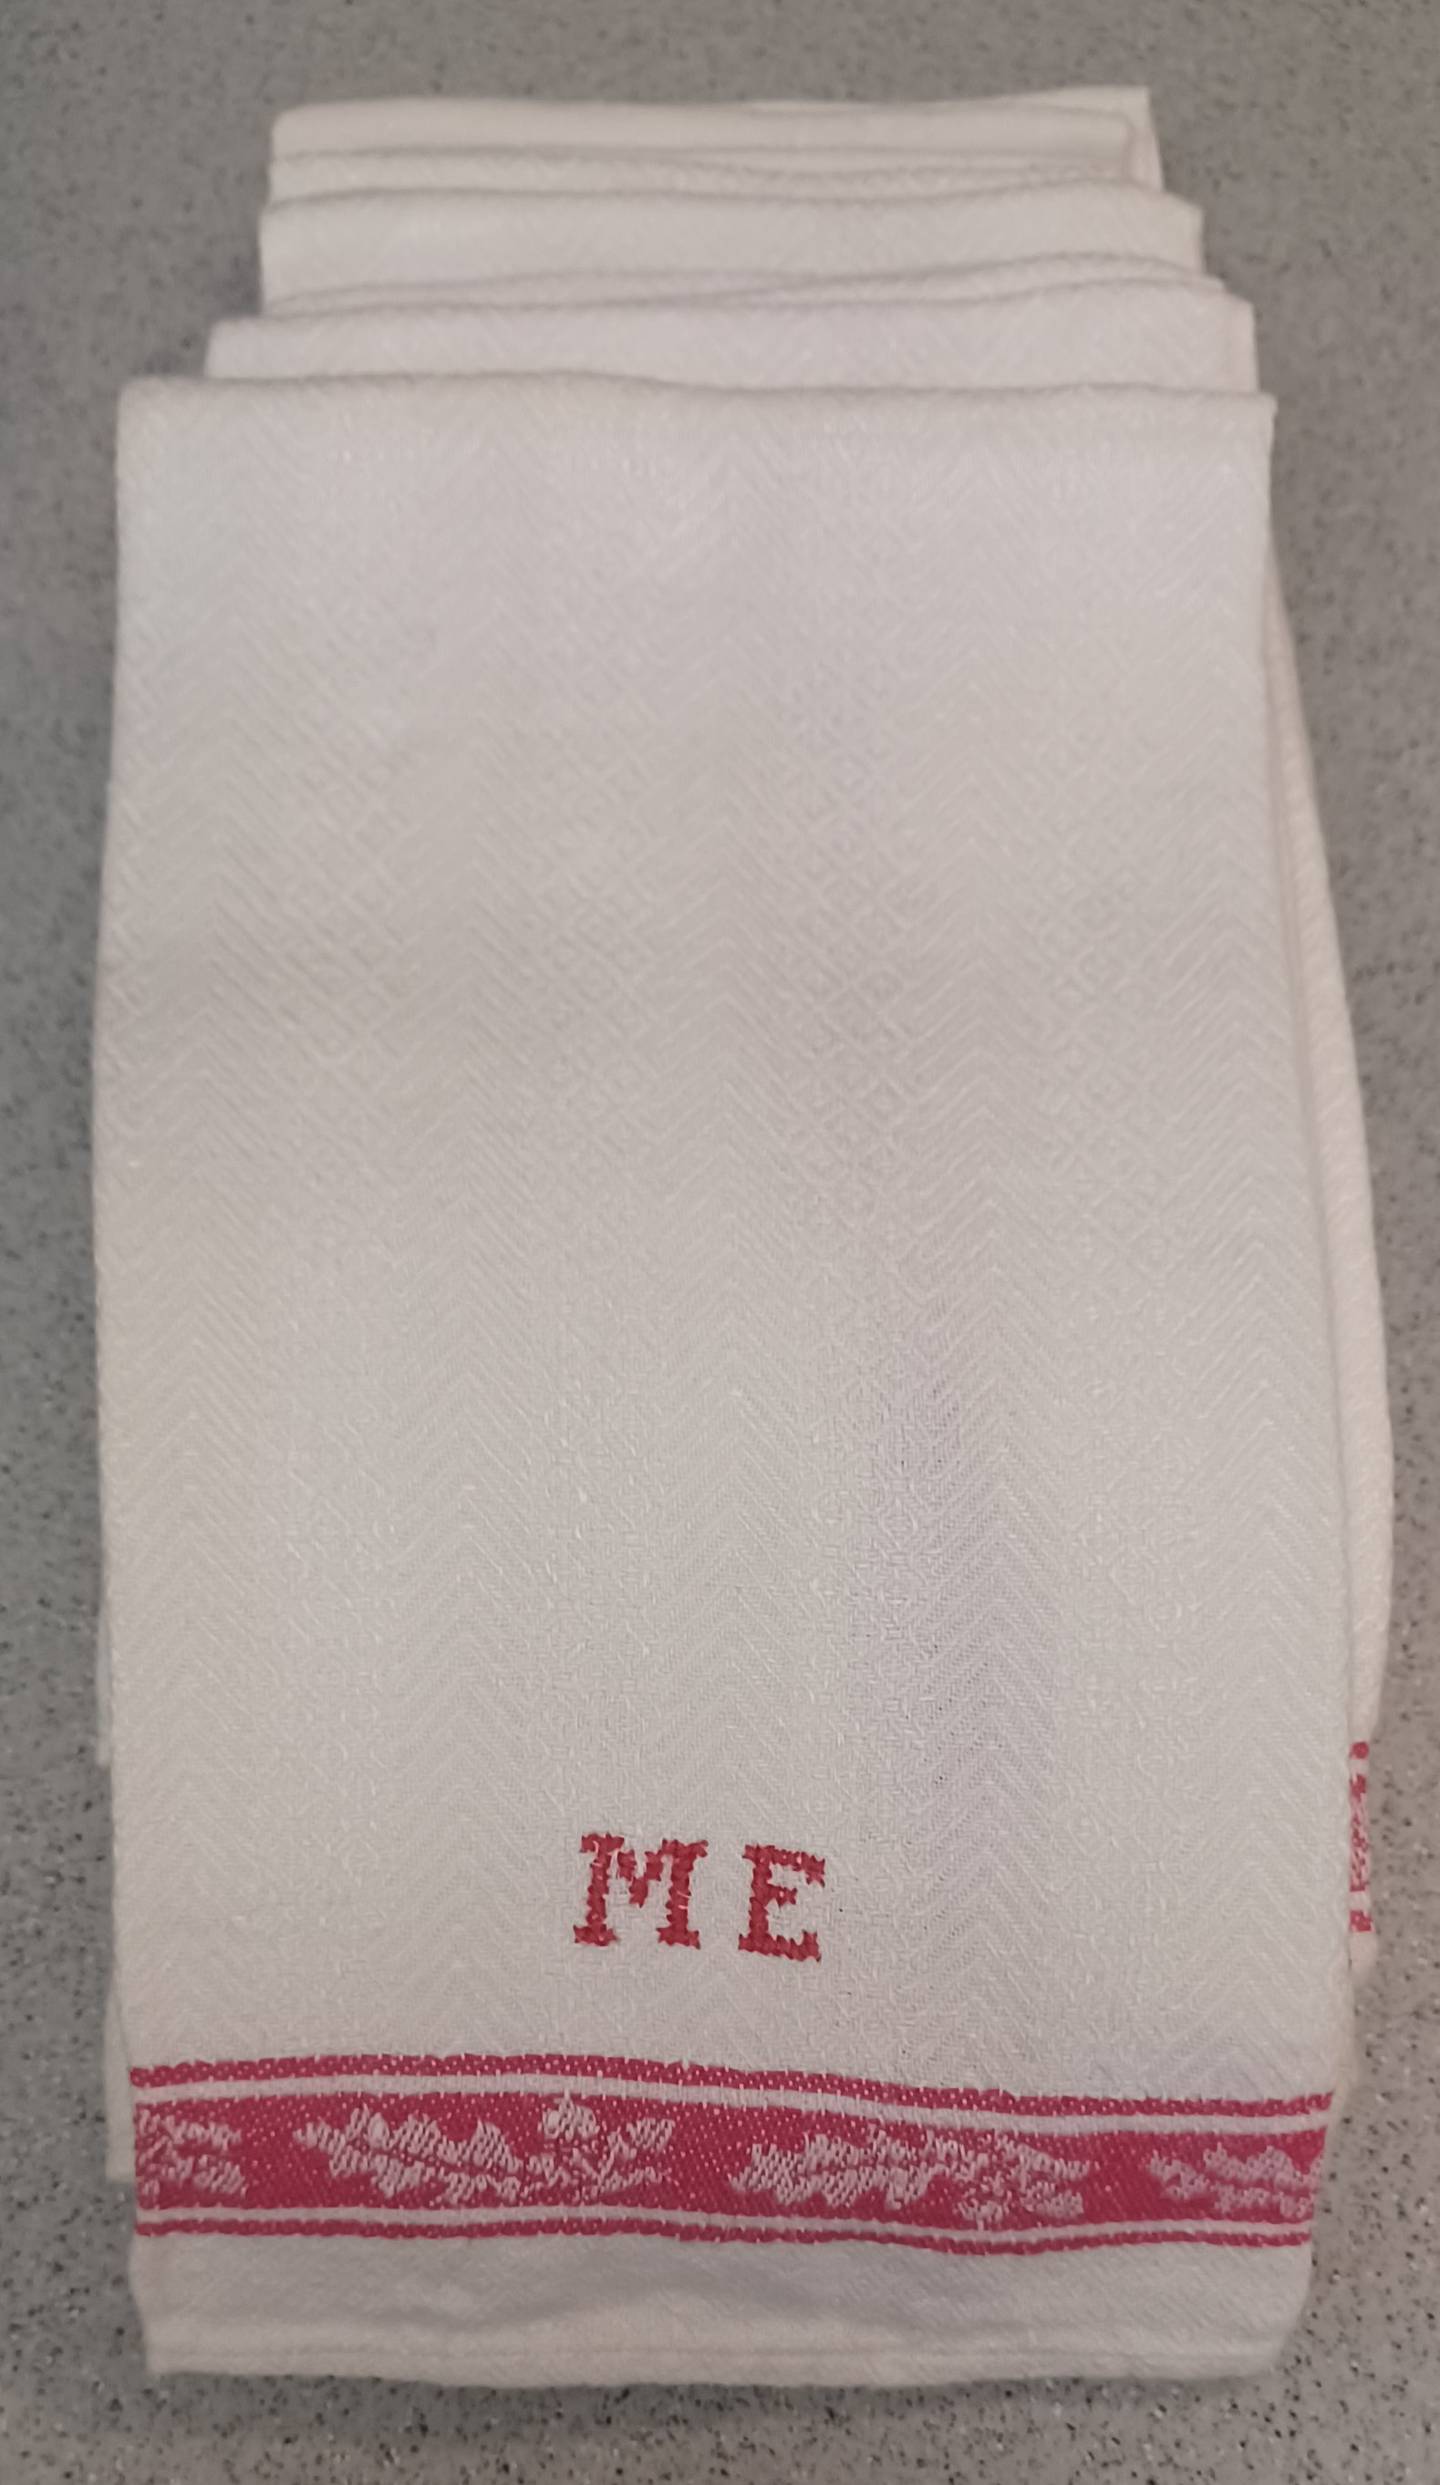 Linens embroidered with initials M.E. for Maia Erikson, an aunt who helped raise Ingrid Rowlett’s mother, Maj-Lis. Rowlett plans to donate these linens to the Geneva History Museum as well.